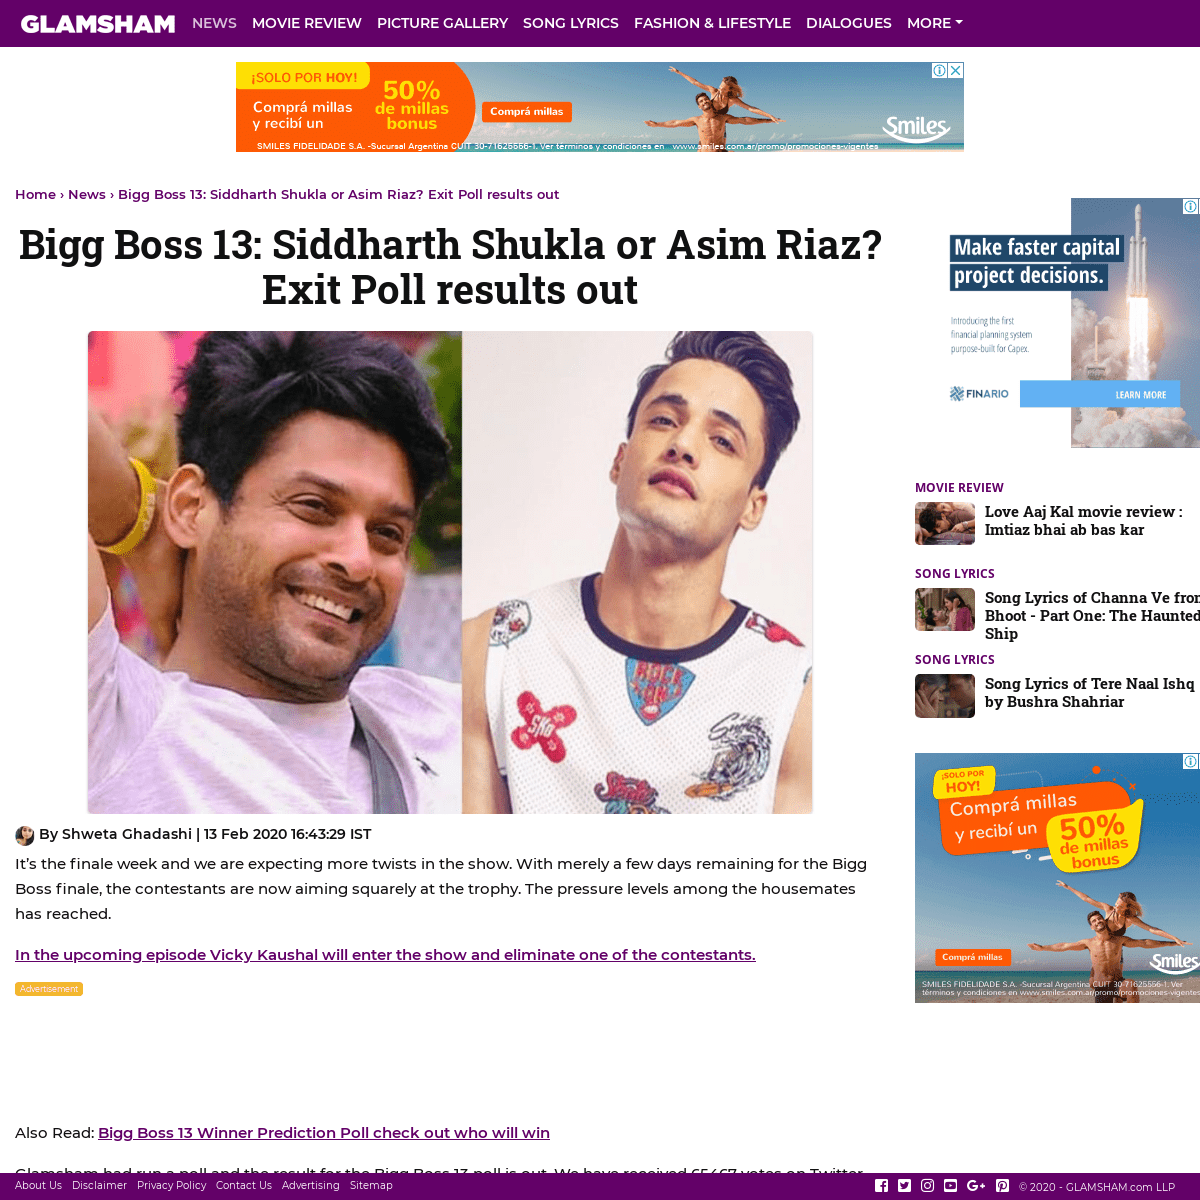 A complete backup of www.glamsham.com/en/bigg-boss-13-siddharth-shukla-or-asim-riaz-exit-poll-results-out